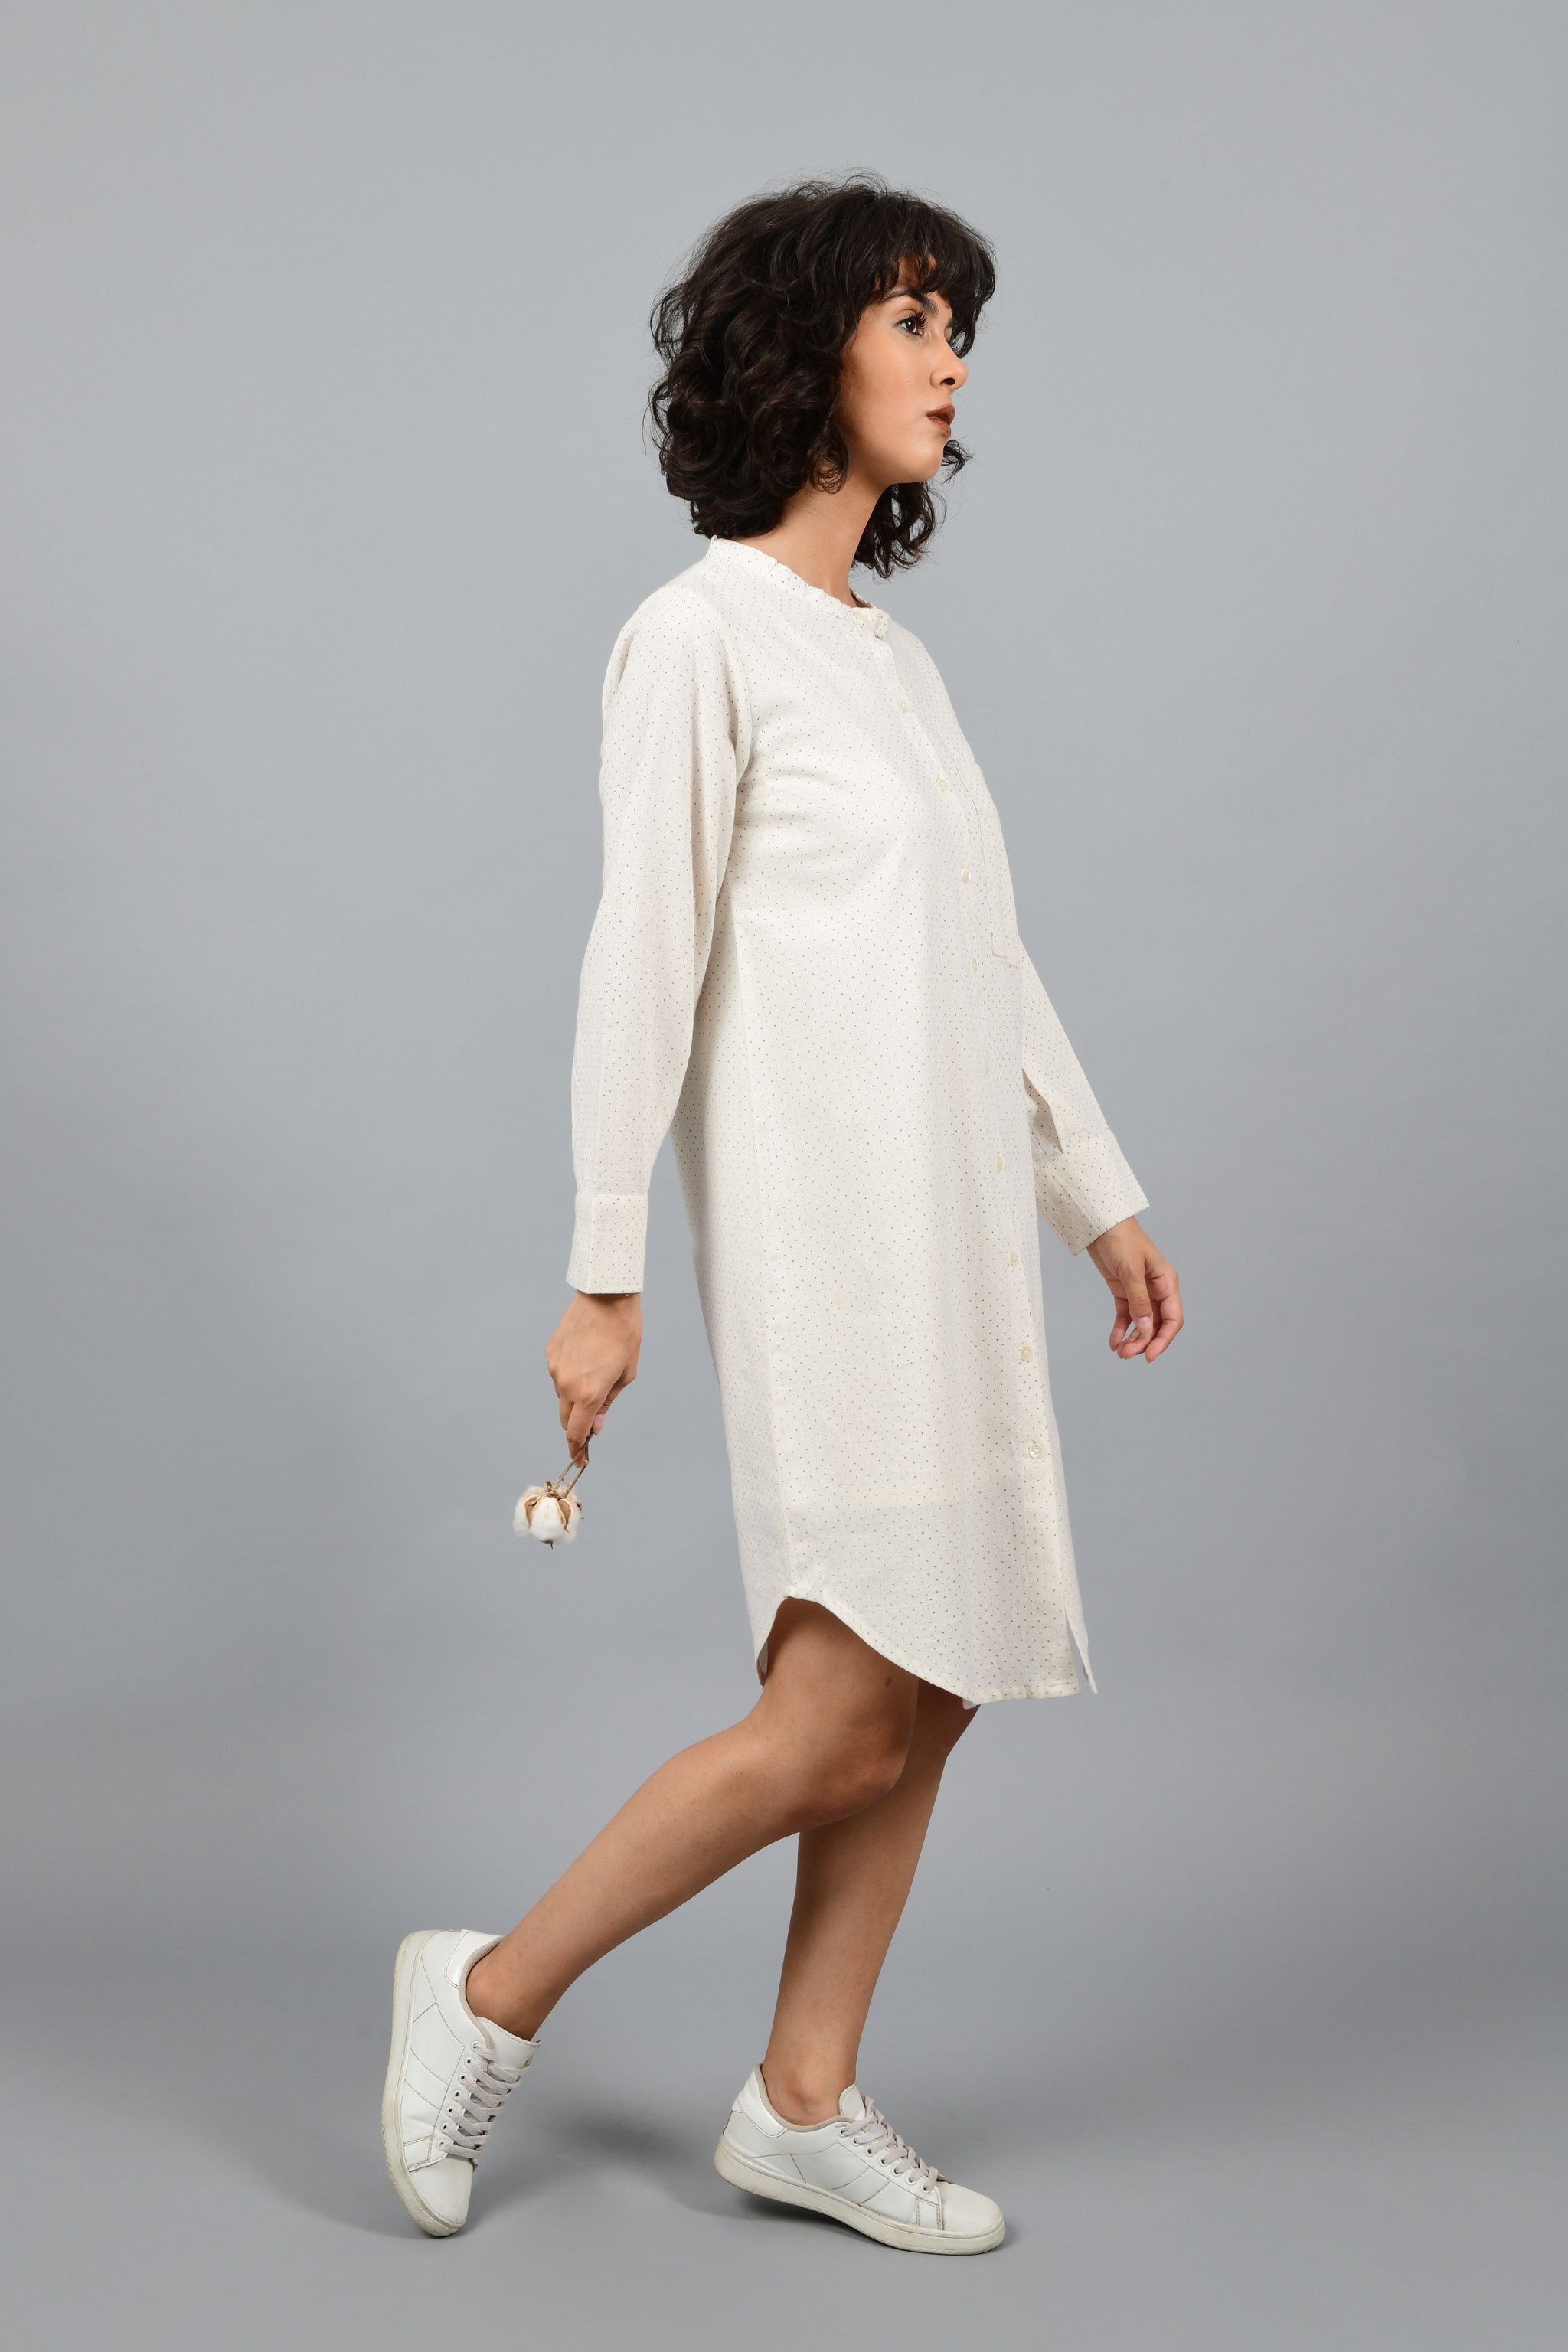 Clear Day | Printed Shirt Dress – Cotton Rack